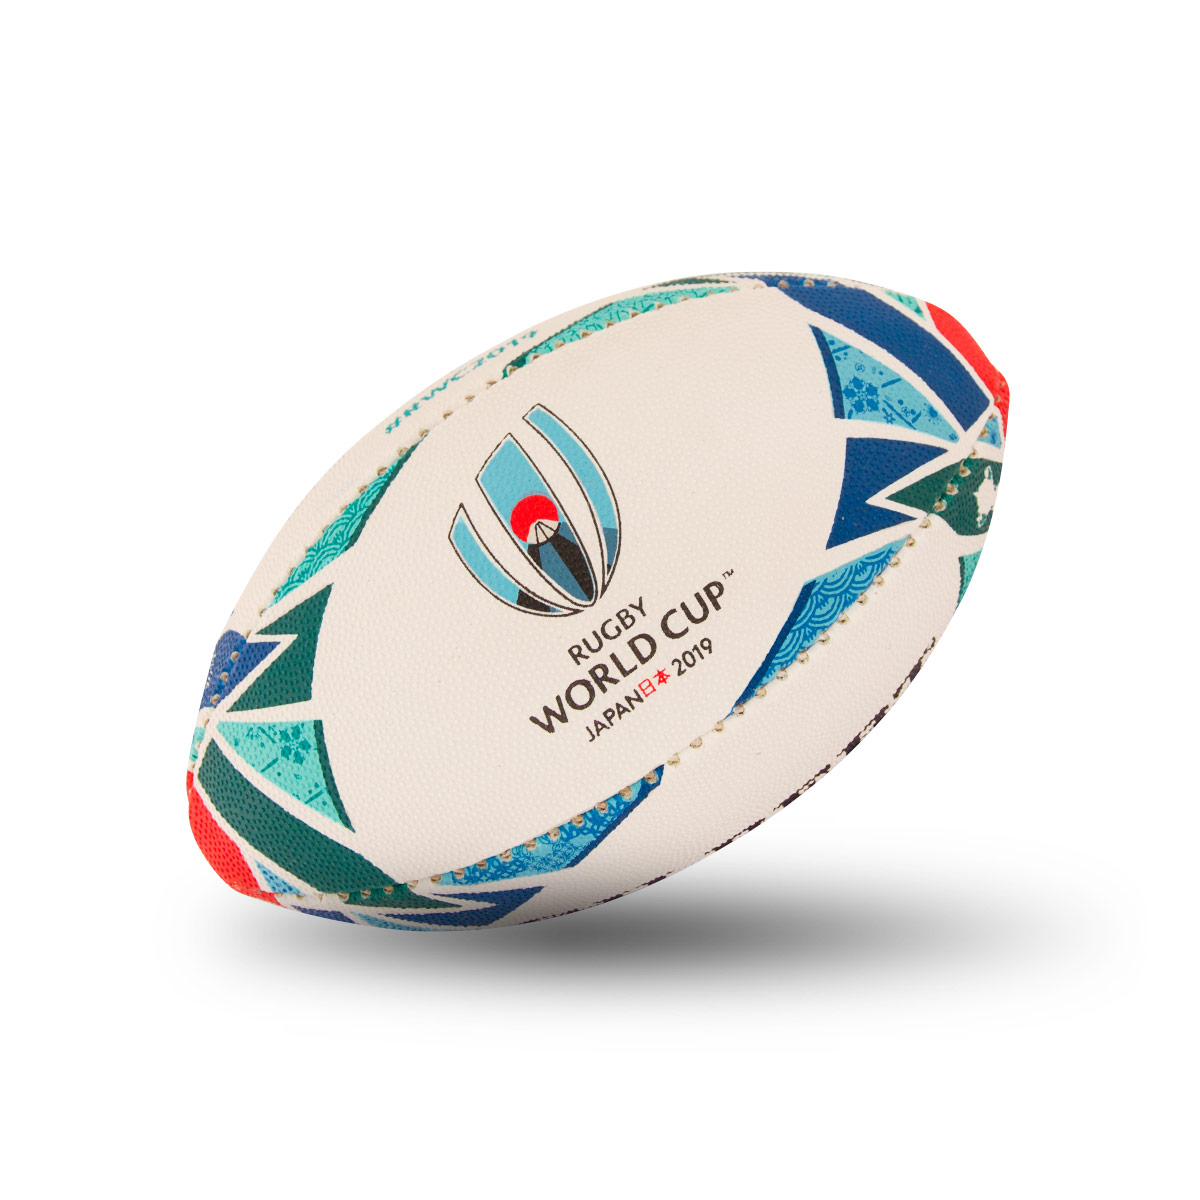 How To Qualify For The Rugby World Cup